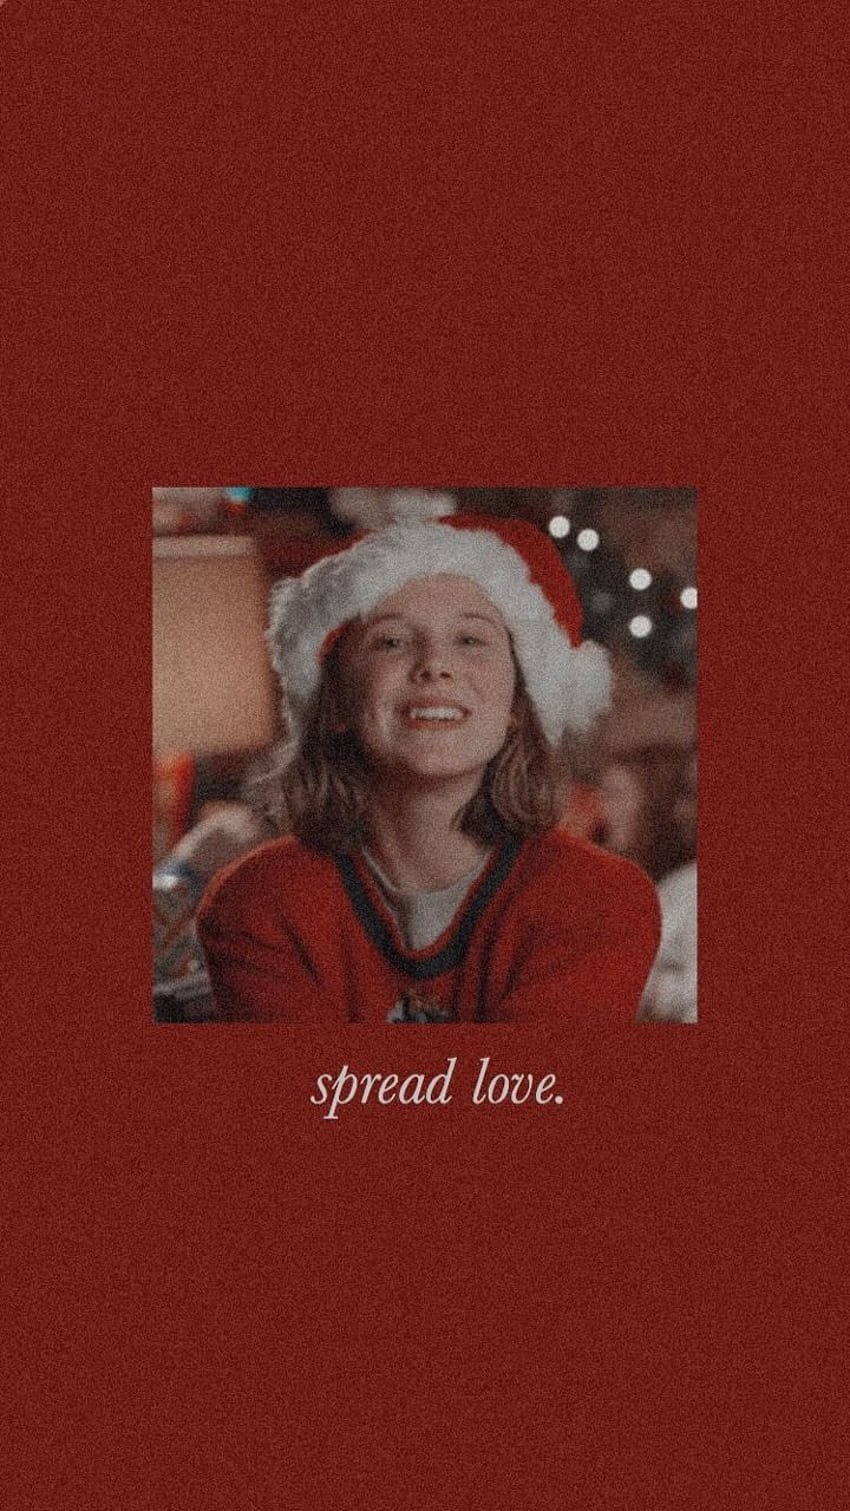 A red background with the words spread love - Stranger Things